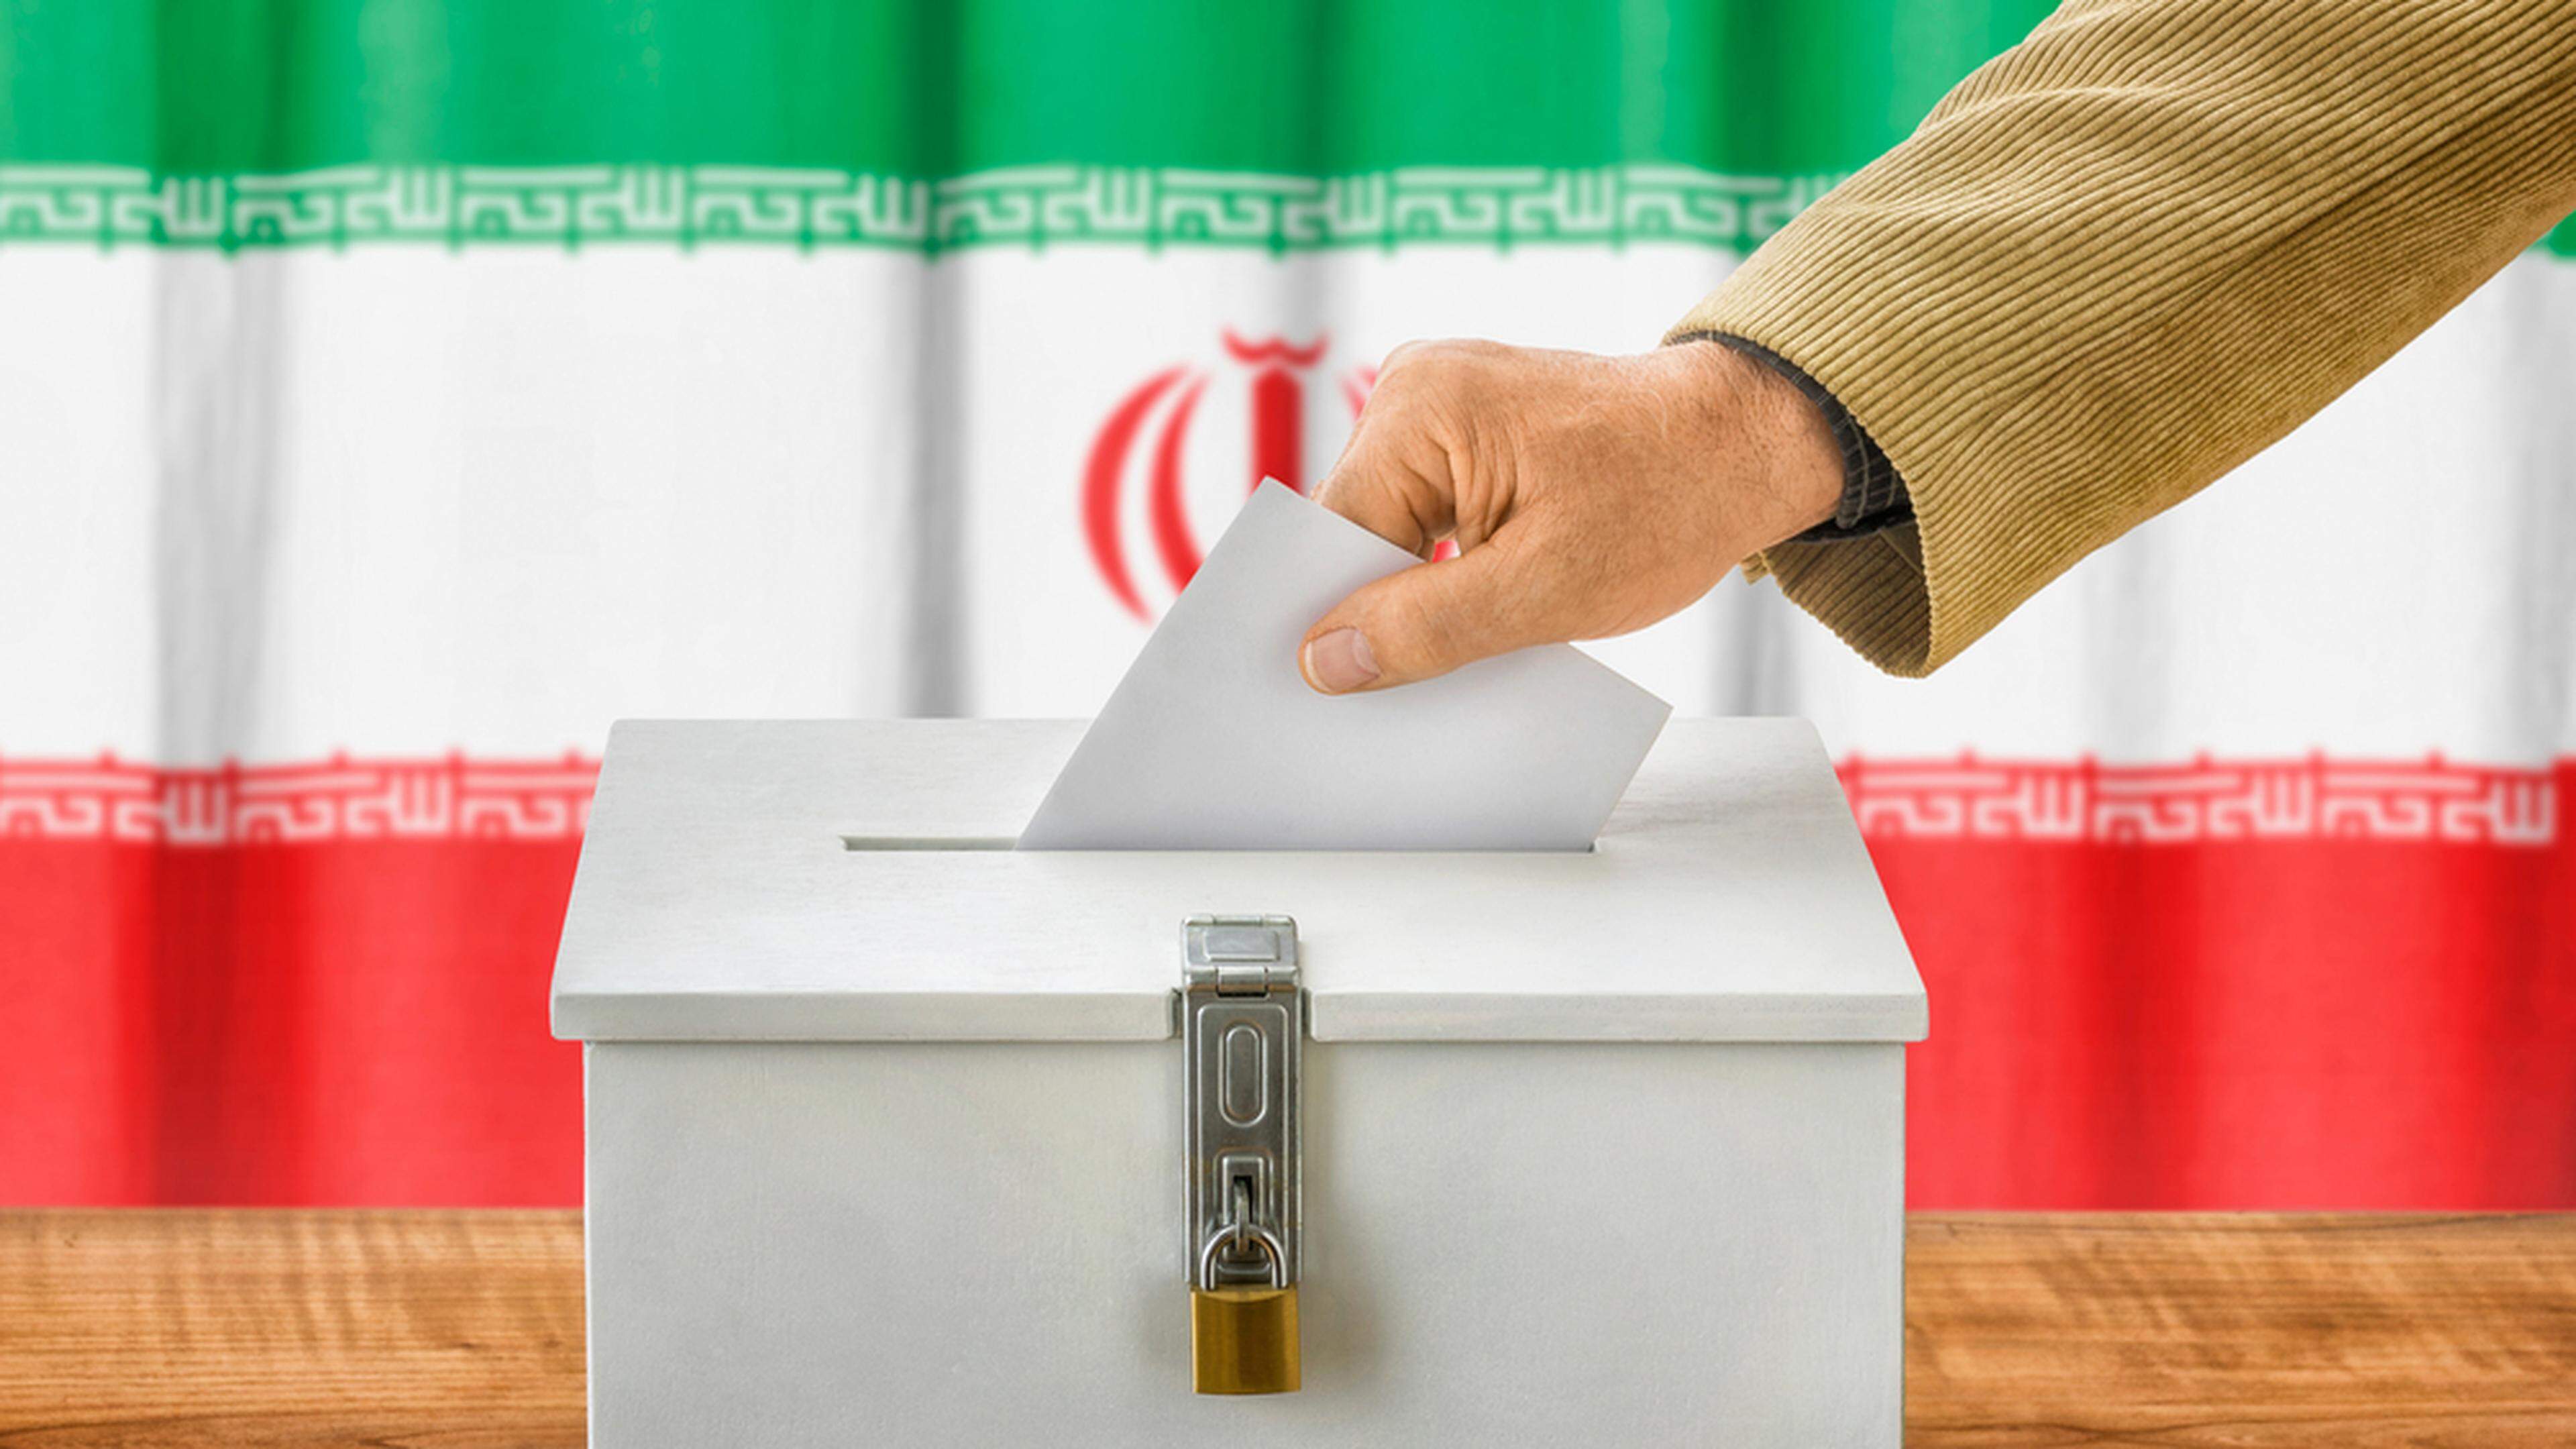 Man putting a ballot into a voting box in Iran